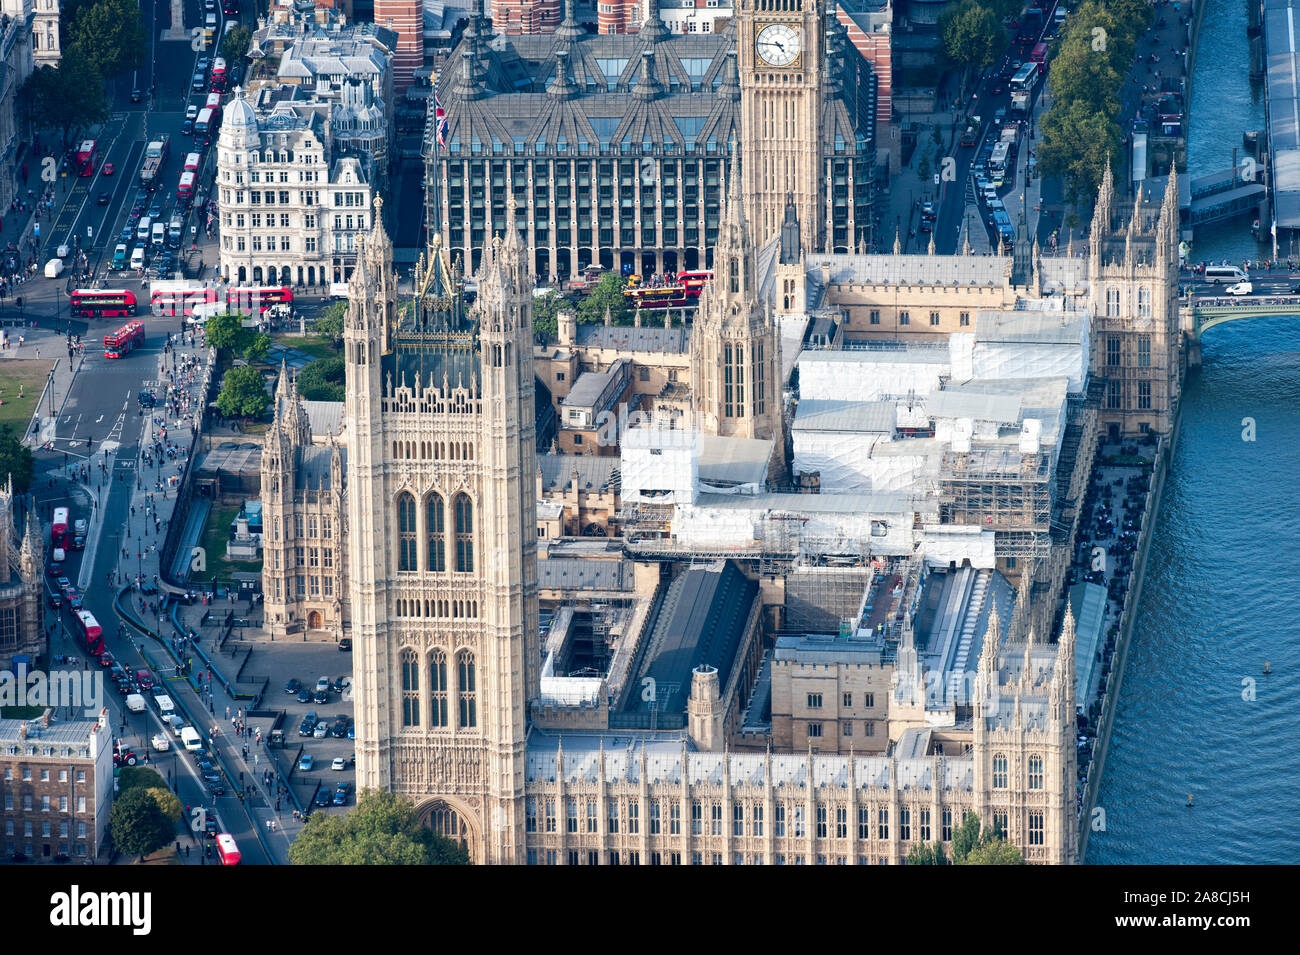 Work has begun on the 6 billion pound restoration and repair project on Houses of Parliament. The Joint Committee on the Palace of Essential renovations  is forecast to take eight years to complete.  15/09/2016 Stock Photo